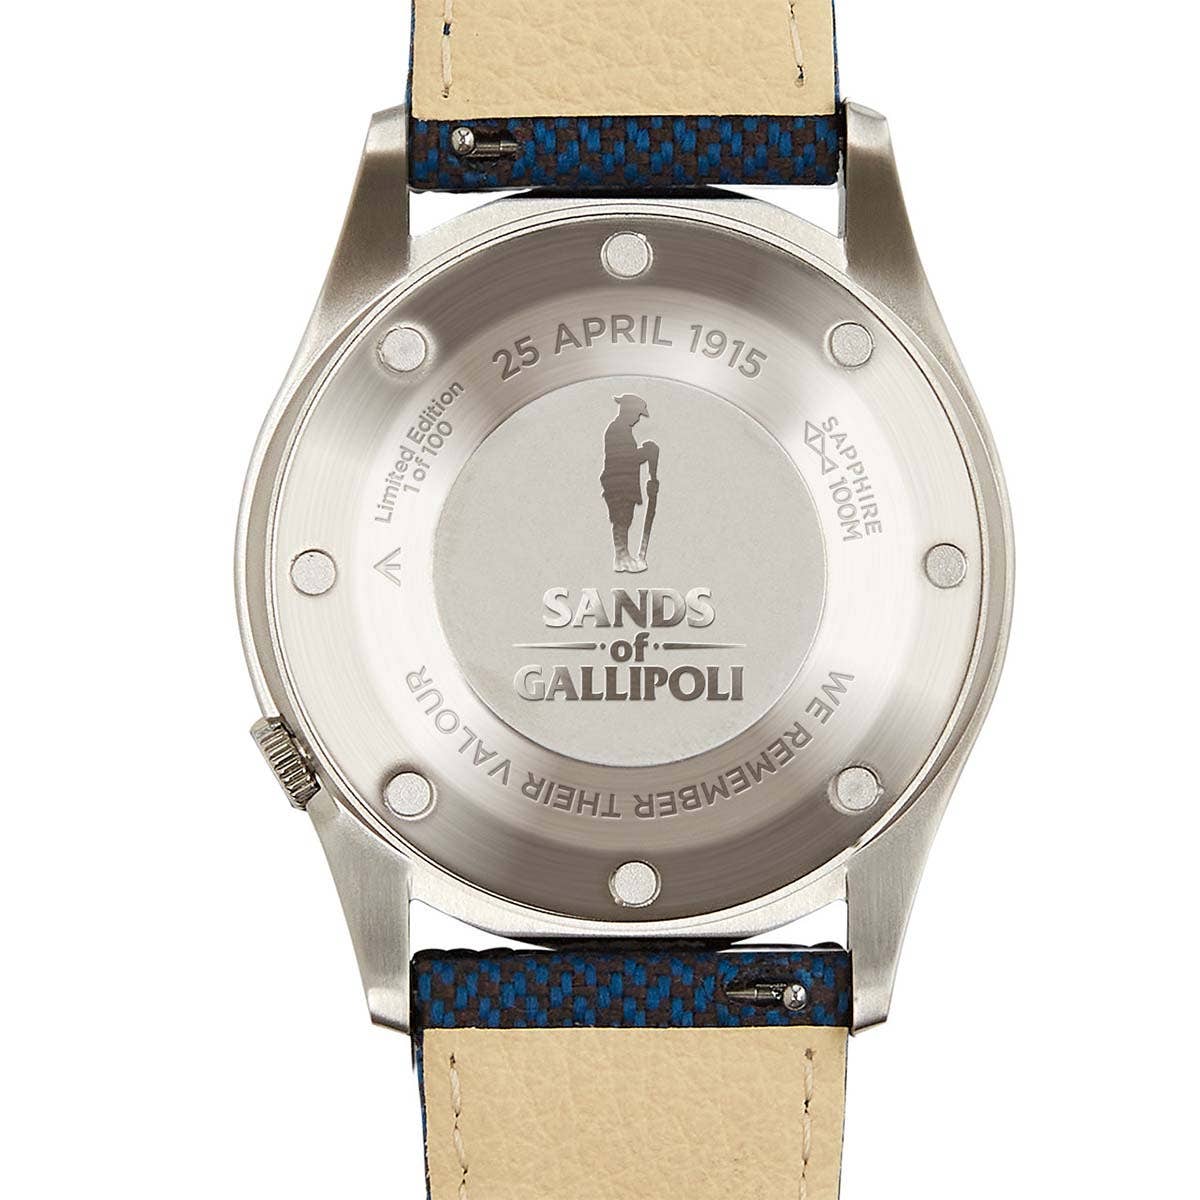 Sands of Gallipoli Limited Edition Watch